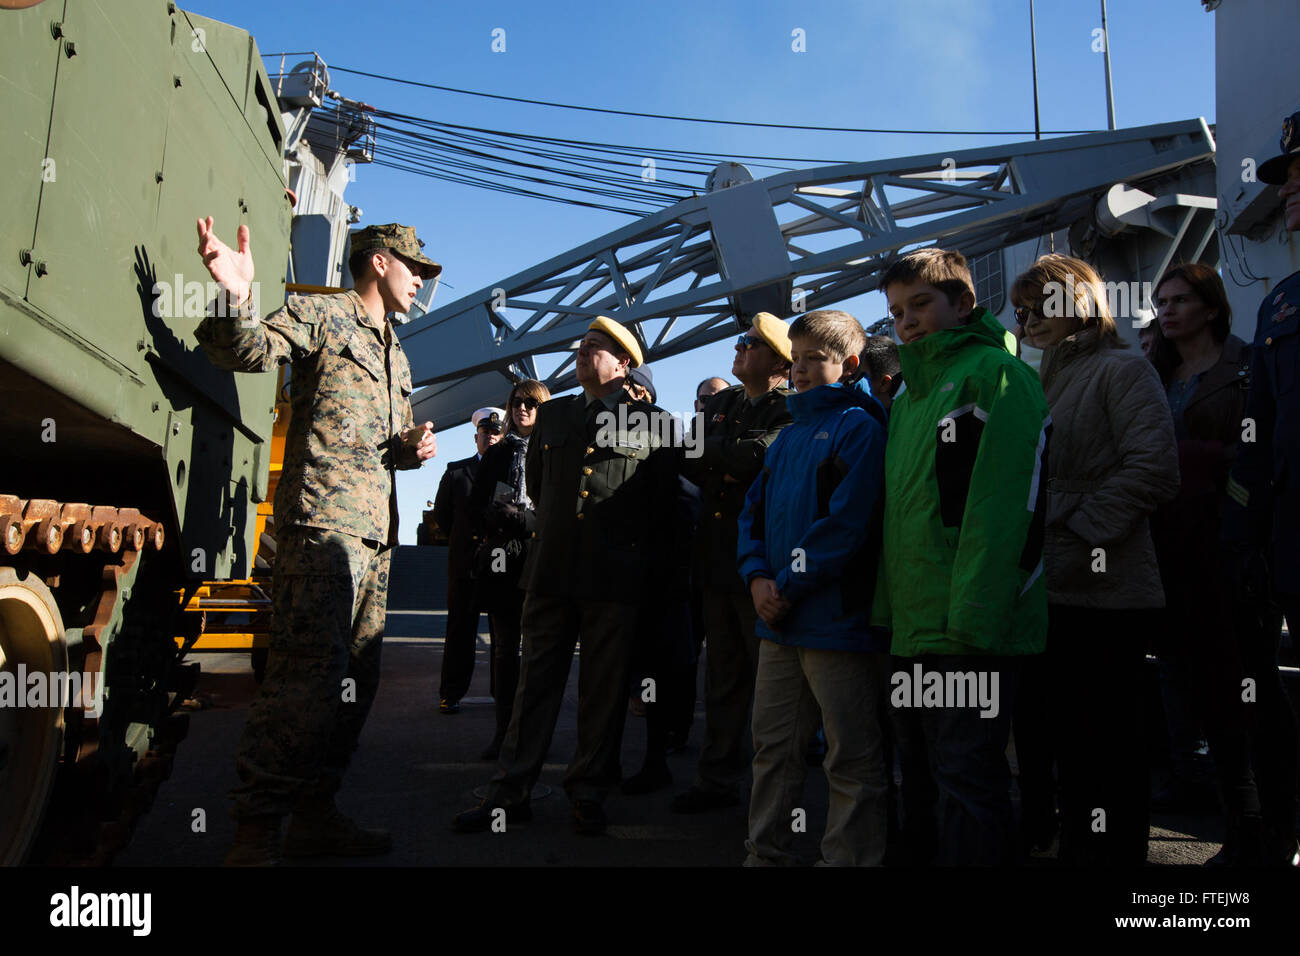 VALENCIA, Spain (Dec. 31, 2014) Damian Cantu, a heavy equipment operator with Combat Logistics Battalion 24, 24th Marine Expeditionary Unit, explains the capabilities of an M9 Armored Combat Earthmover to Spanish civilians and government and military officials aboard the USS Fort McHenry (LSD 43) in Valencia, Spain, Dec. 31, 2014. The 24th MEU and Iwo Jima Amphibious Ready Group are conducting naval operations in the U.S. 6th Fleet area of operations in support of U.S. national security interests in Europe. Stock Photo